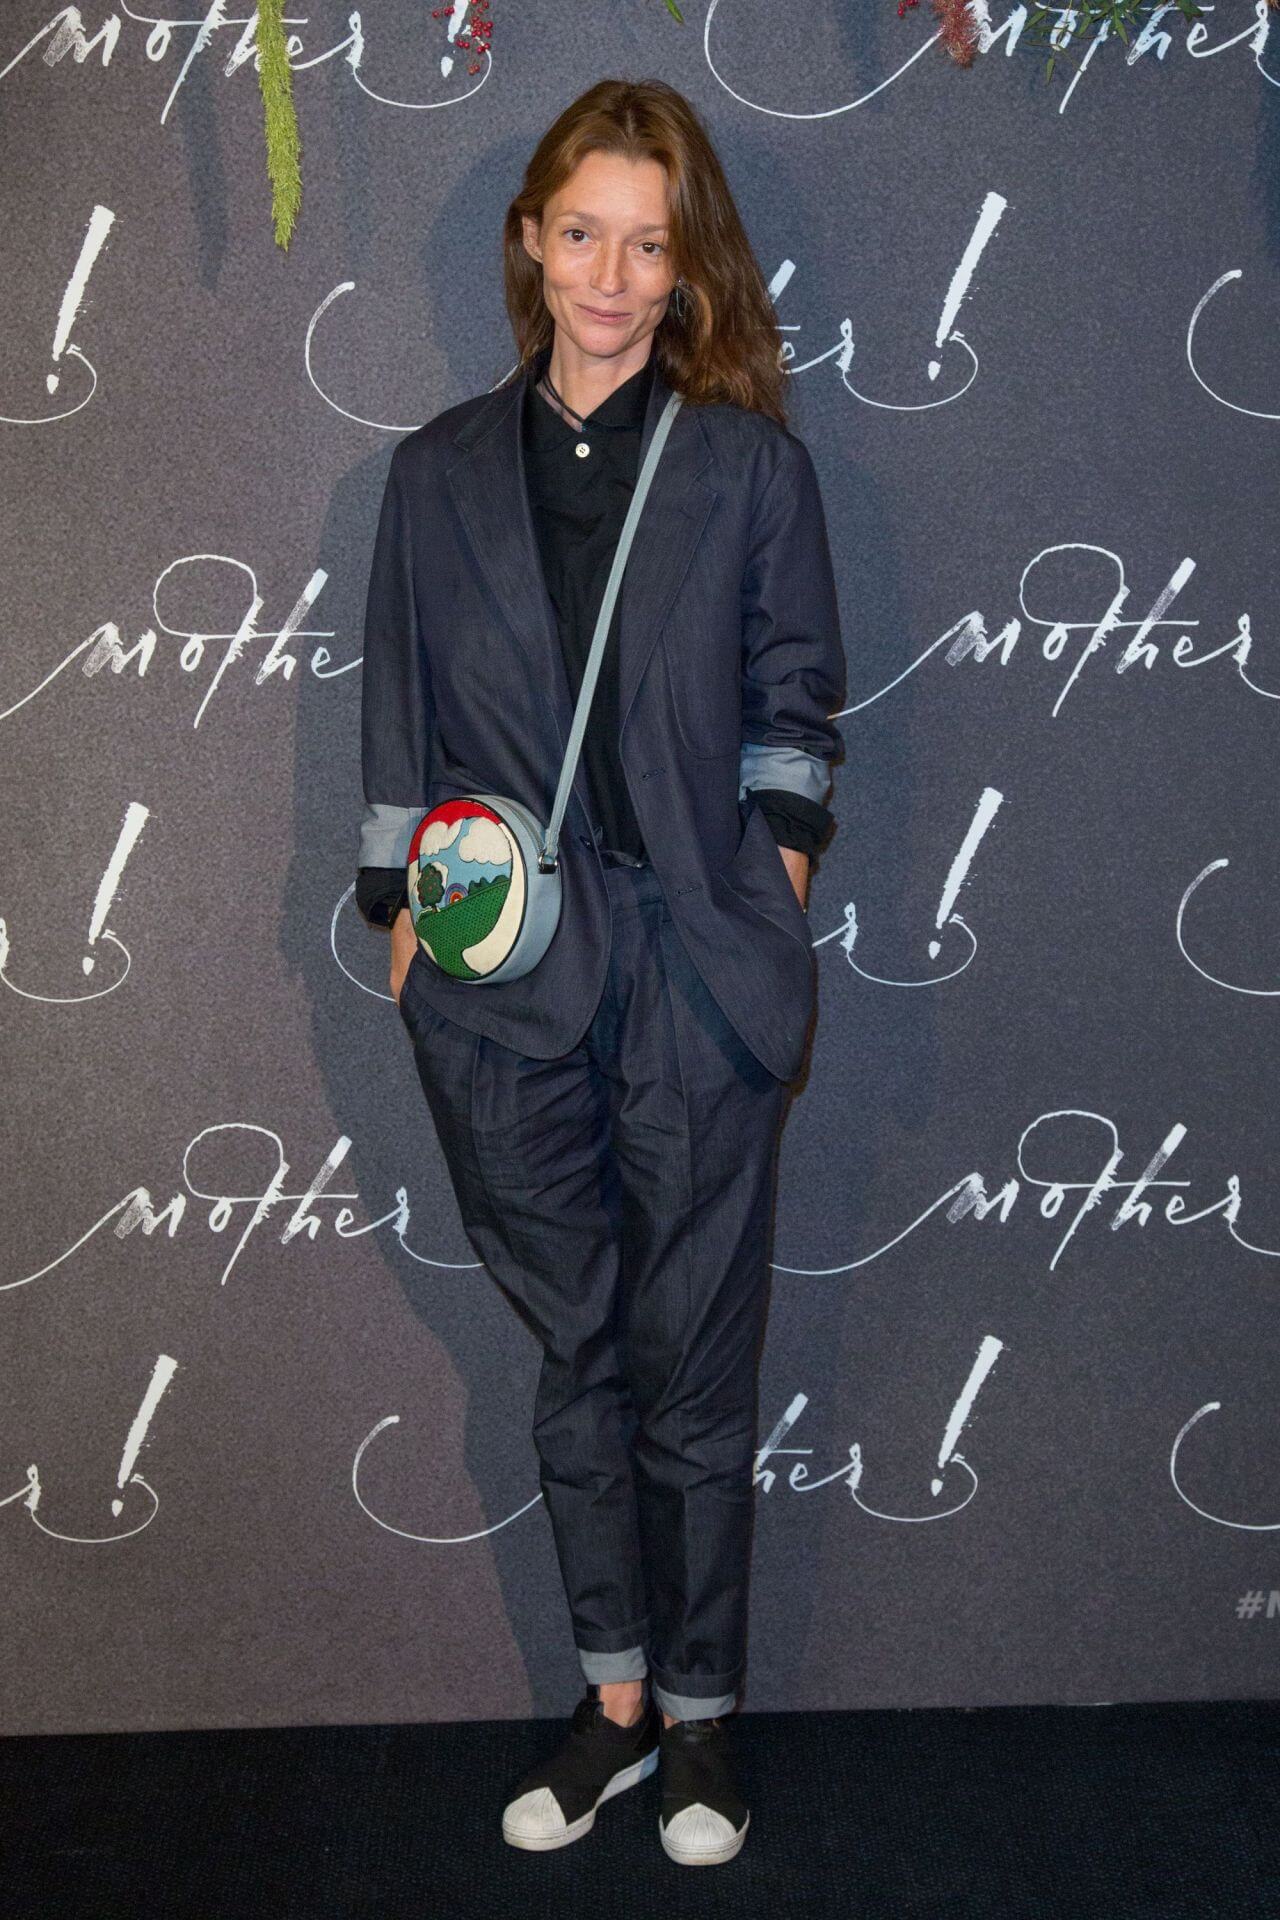 Audrey Marnay In Blue Denim Jacket & Pants With Under Black Shirt At  “Mother!” Premiere in Paris